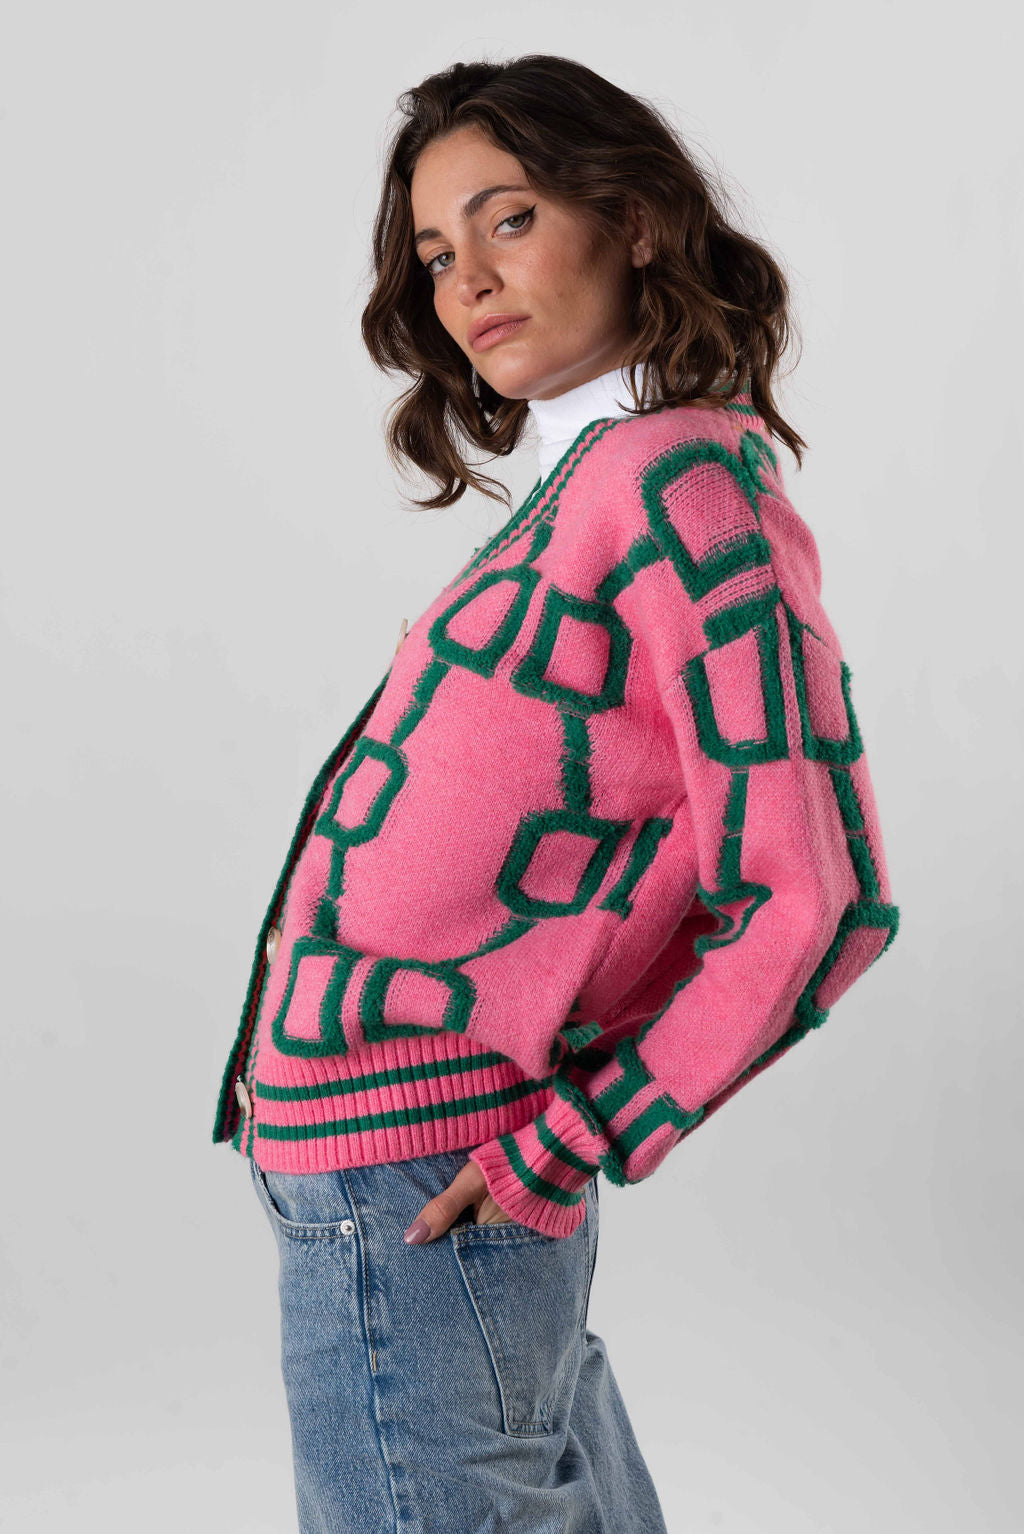 Any Which Way Cardigan In Pink/Green